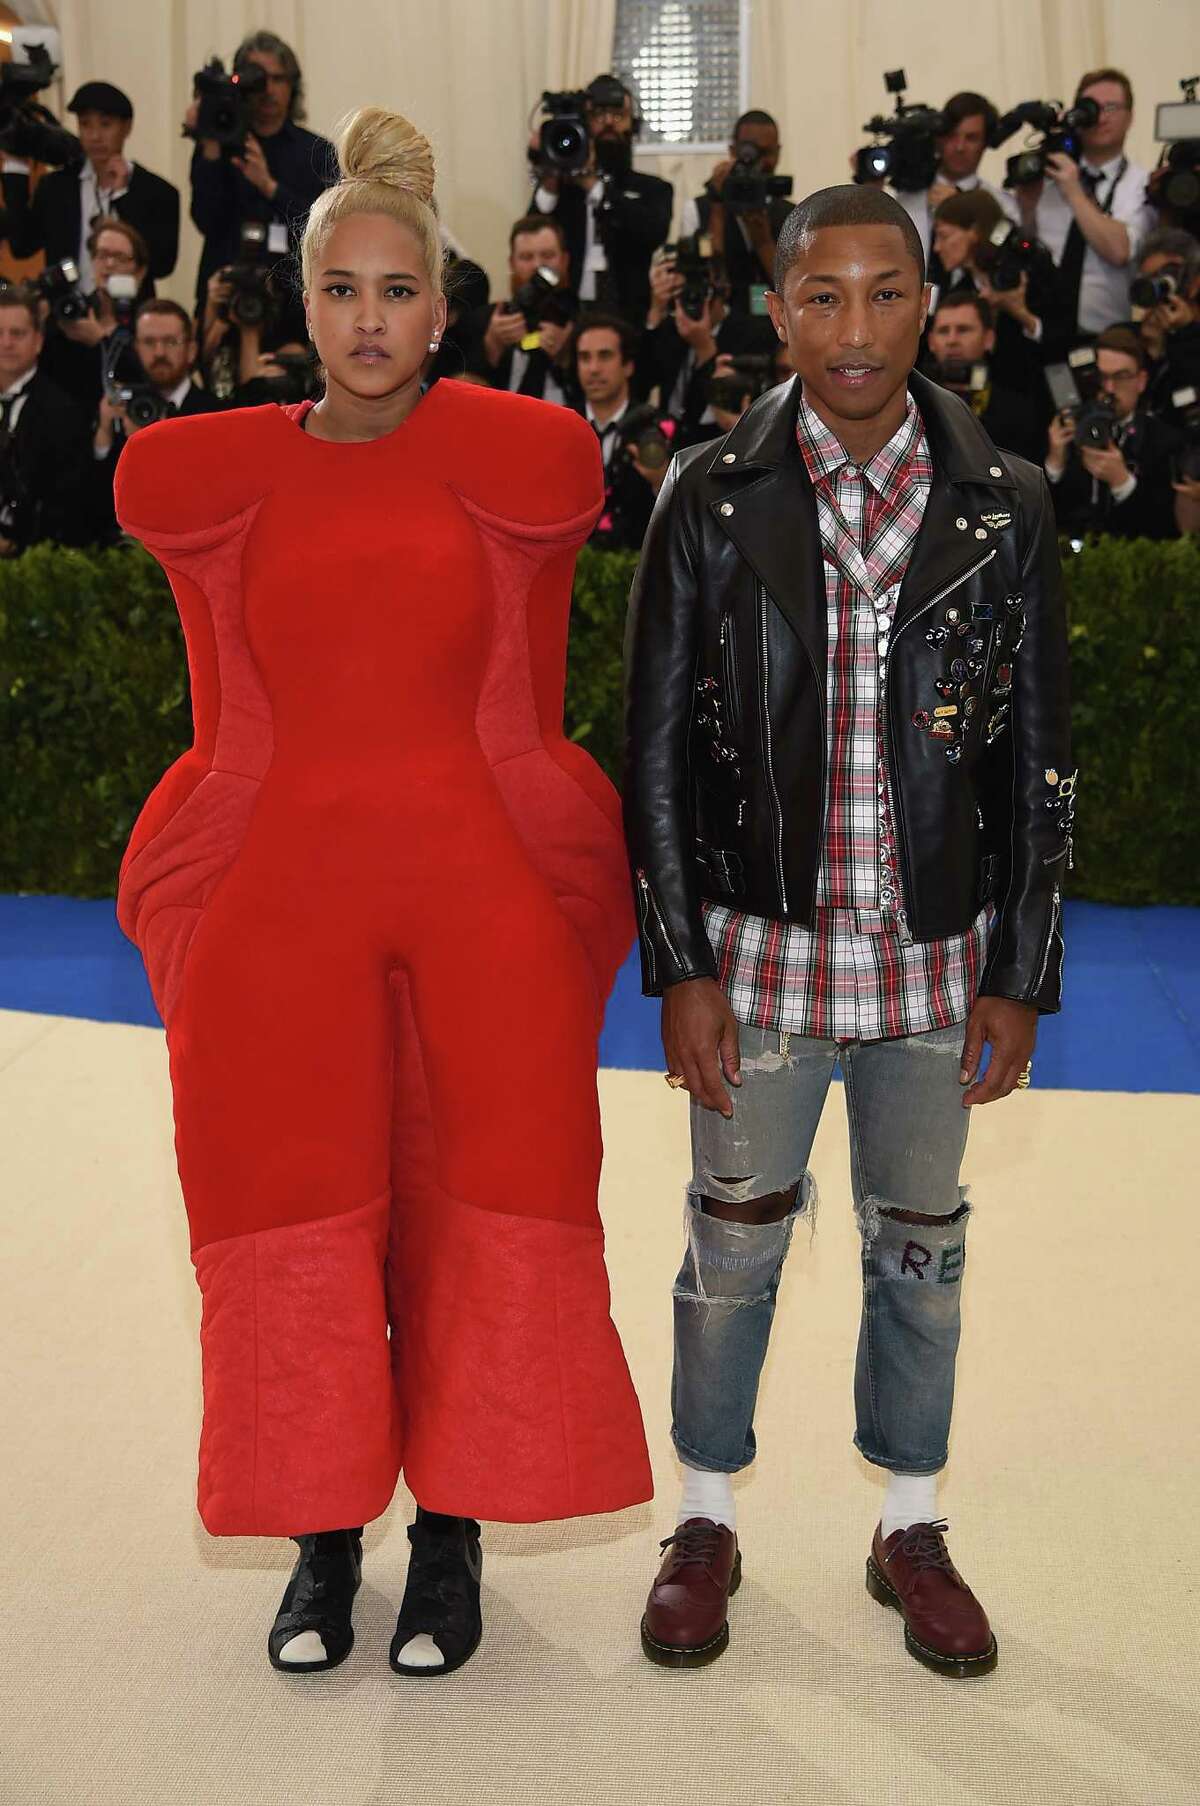 STOP IT: Helen Lasichanh and co-chair Pharrell Williams. Let's start with his too-small clothes, and her cartoon getup.